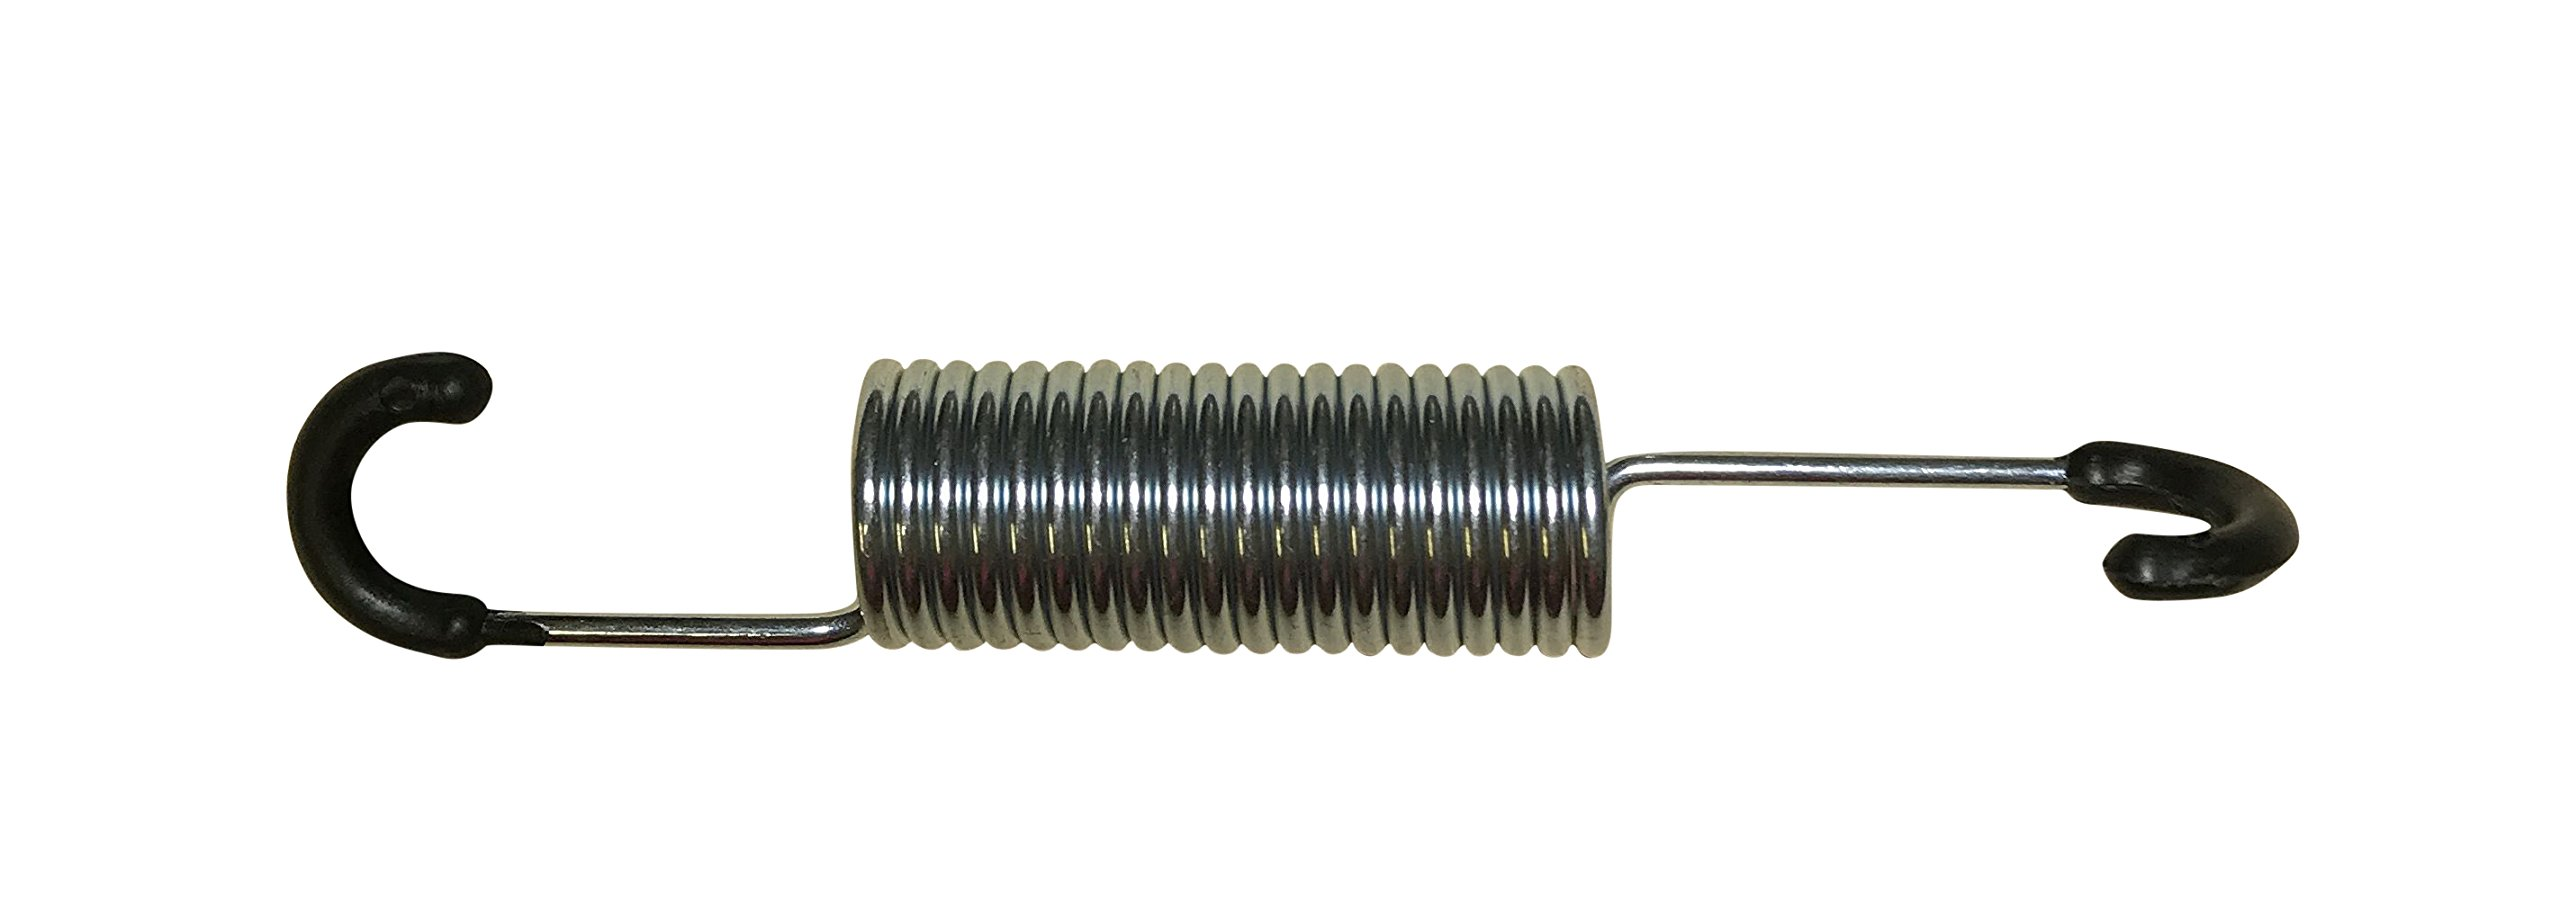 The recoil spring